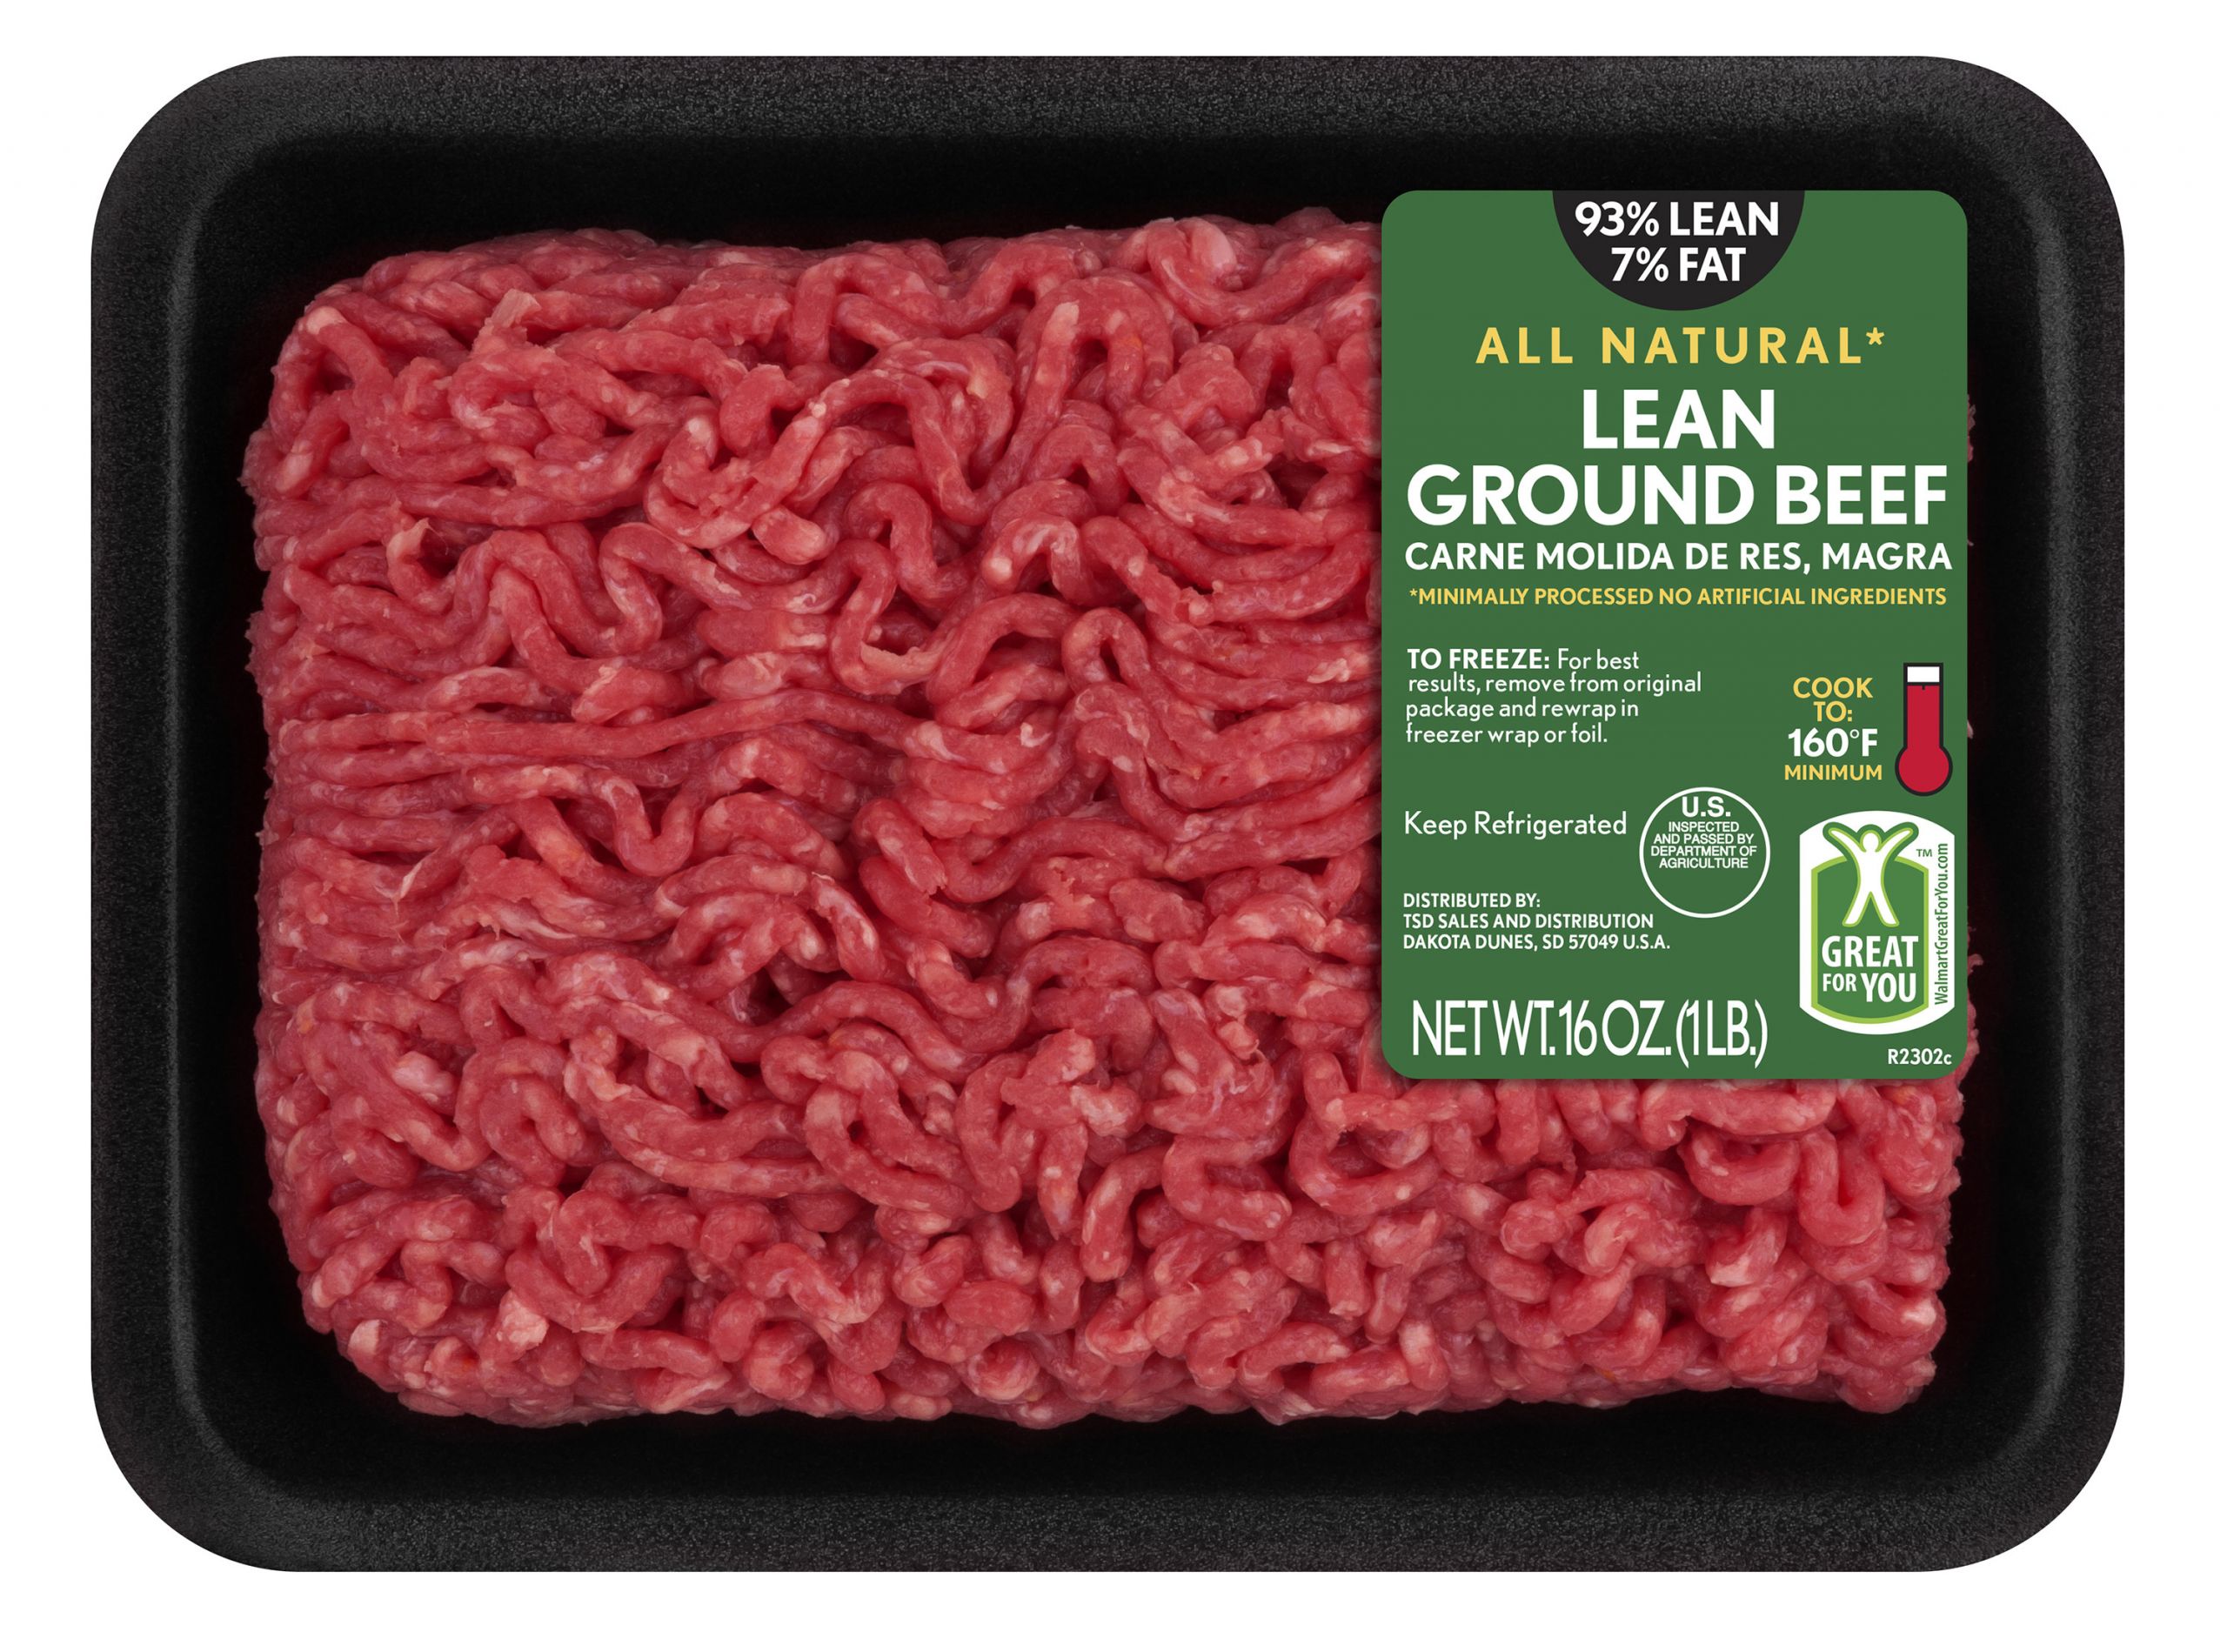 93 7 Ground Beef Elegant All Natural Lean Fat Lean Ground Beef Tray 1 Lb